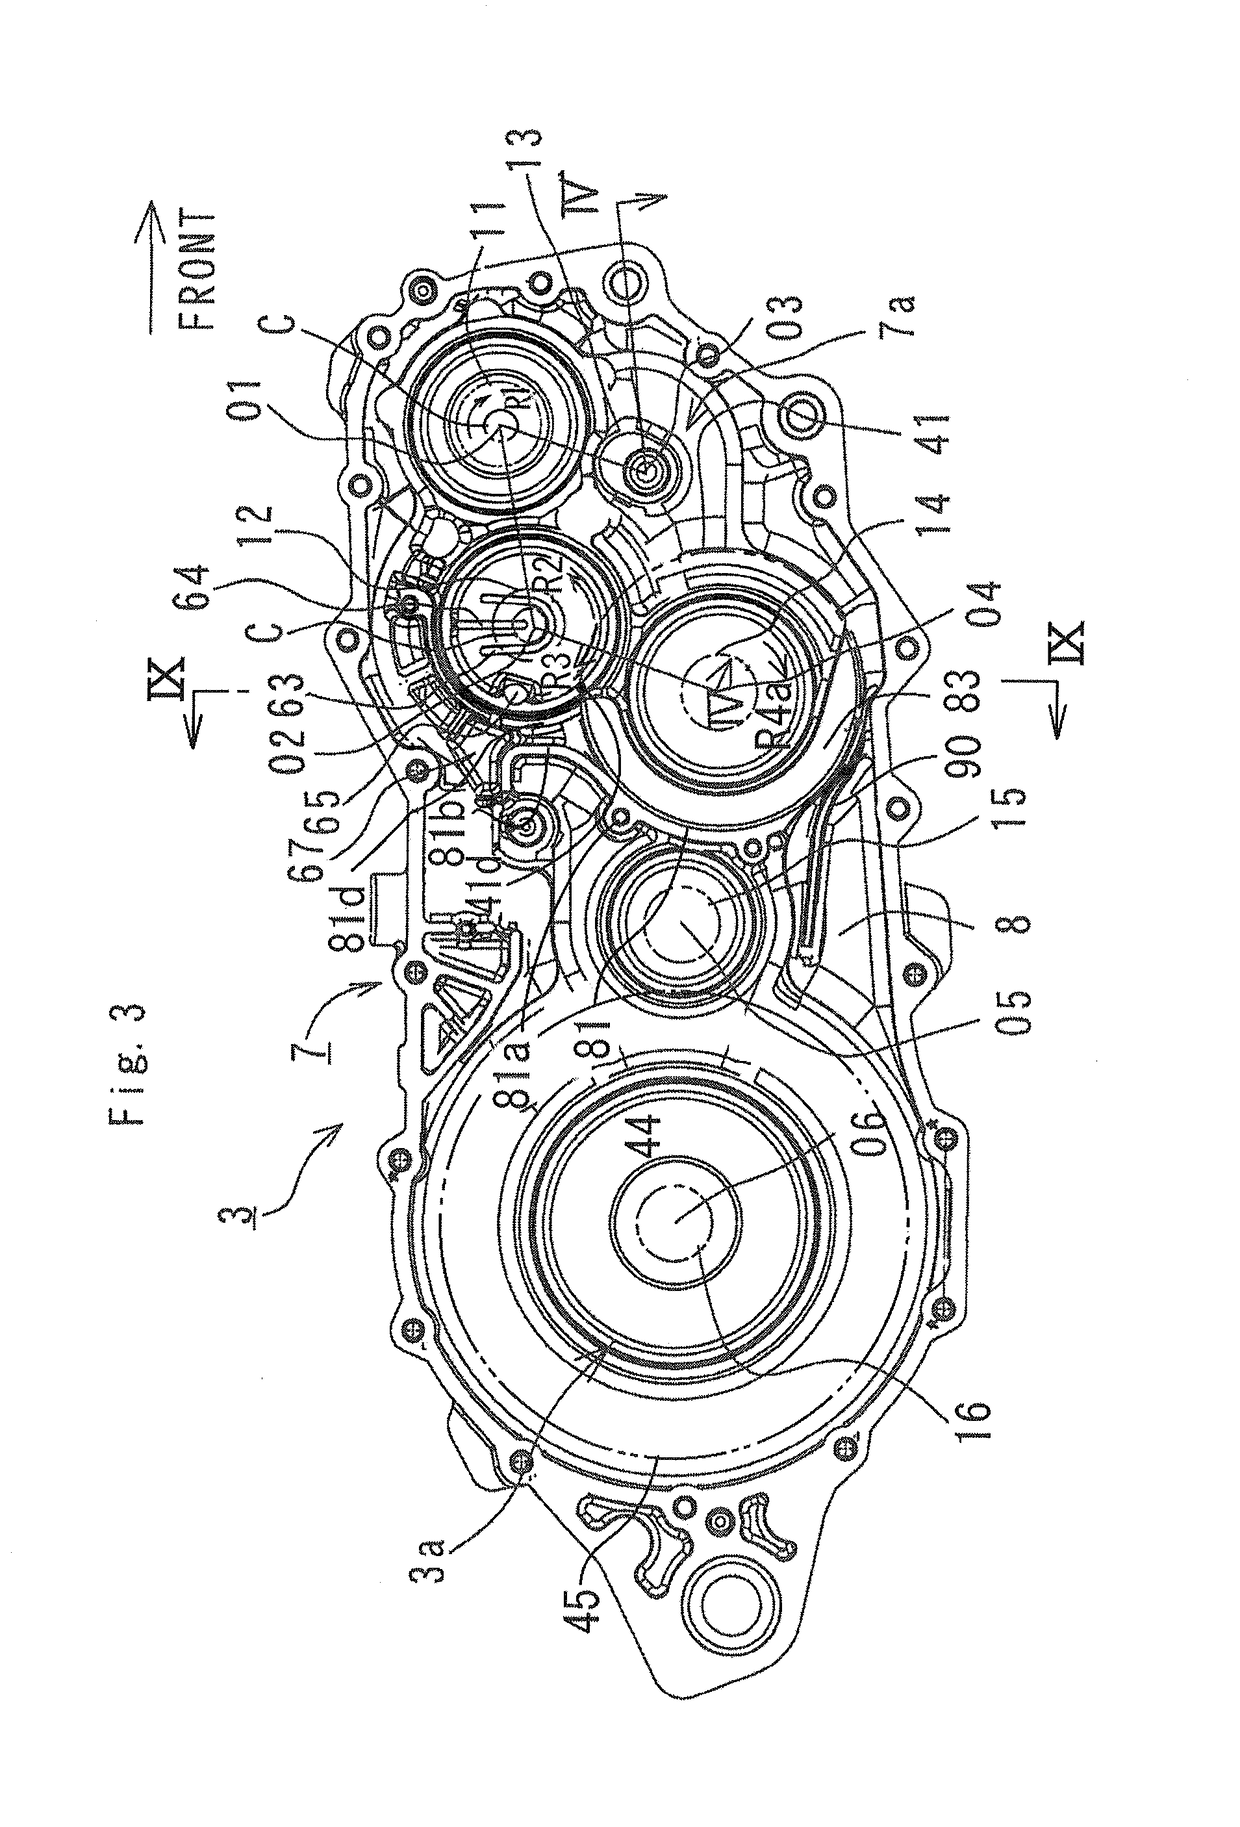 Lubricating apparatus for rotating shaft